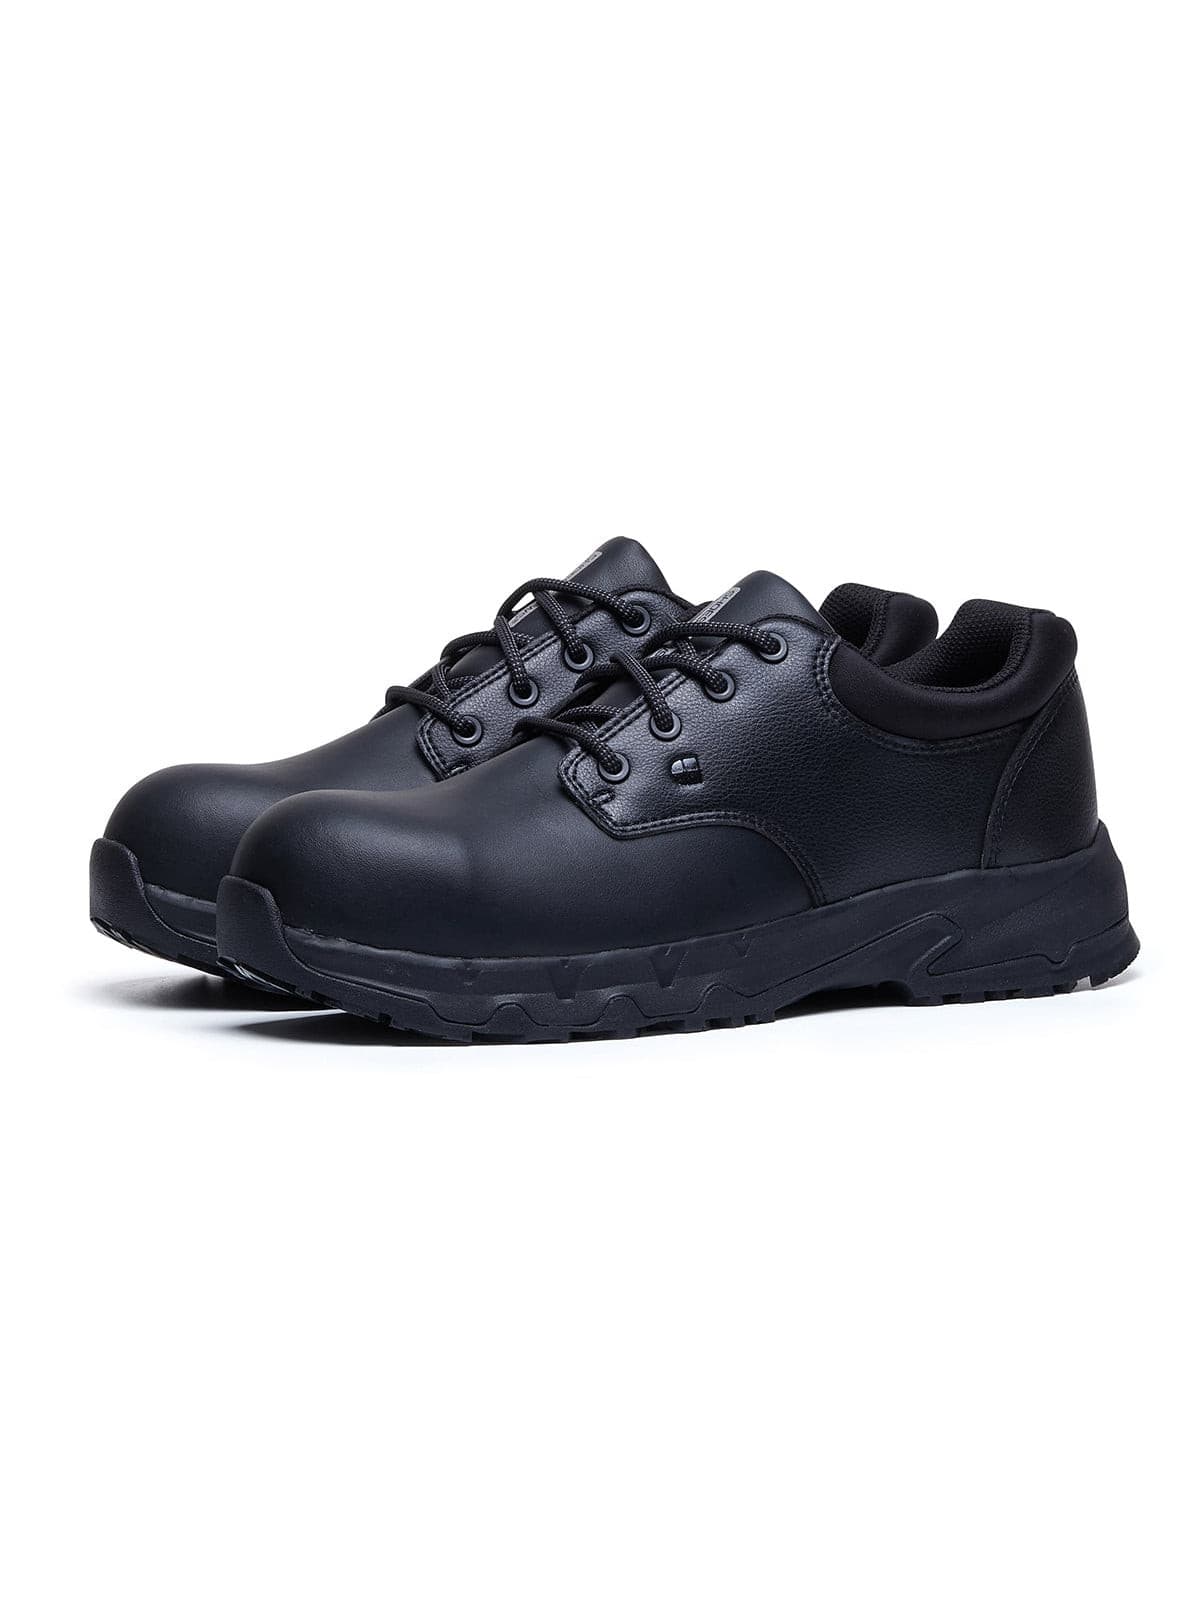 Unisex Safety Shoe Barra (S3) by Safety Shoes -  ChefsCotton